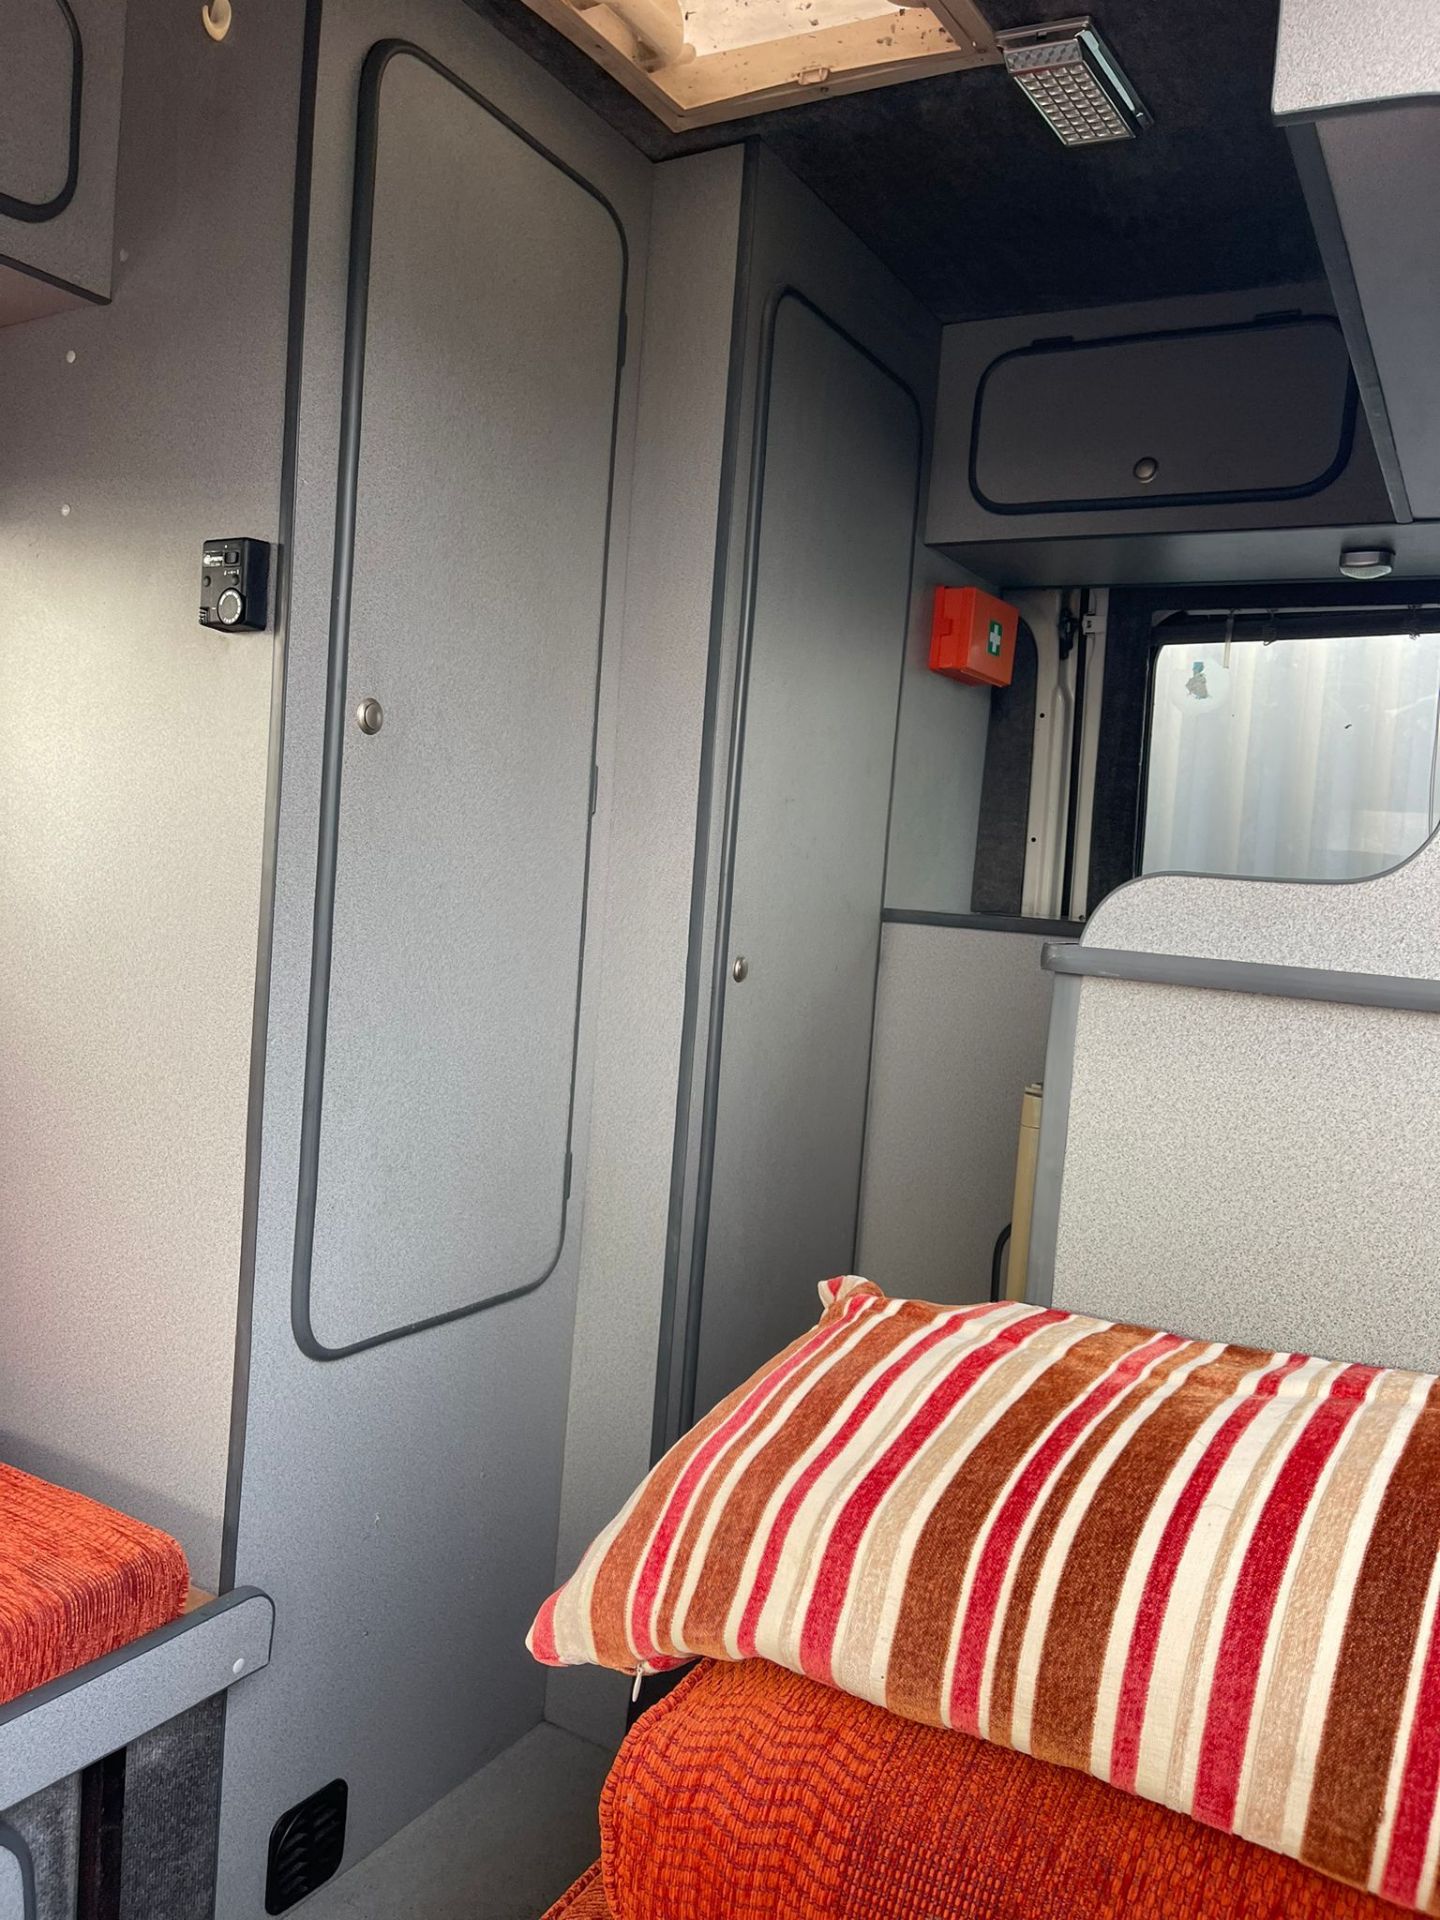 Aztec Camper on Citroen Relay cassis. - Image 27 of 61